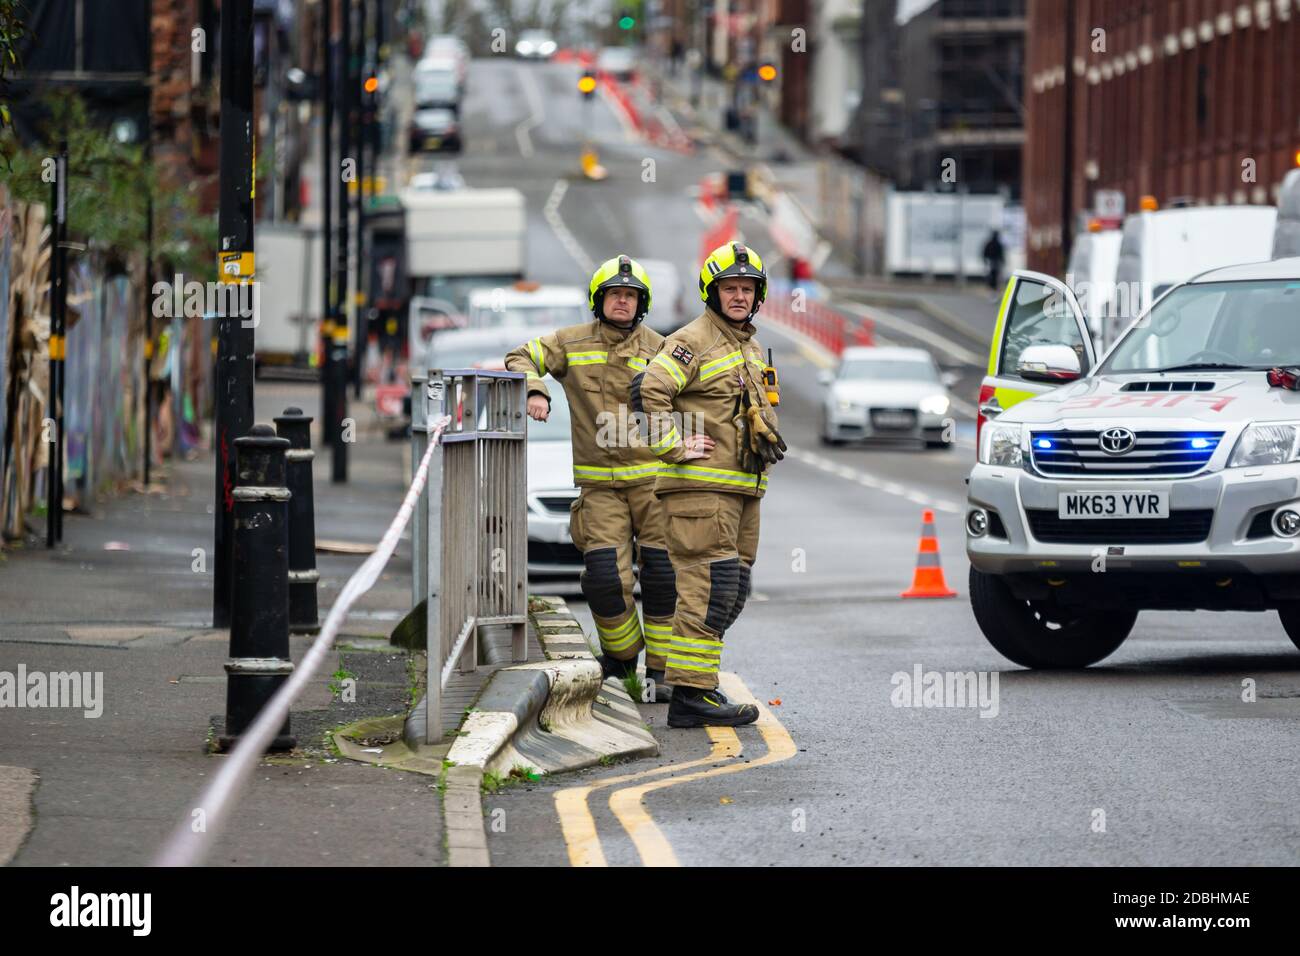 A couple of firefighters from West Midlands Fire Service at an incident in Digbeth, Birmingham. Stock Photo